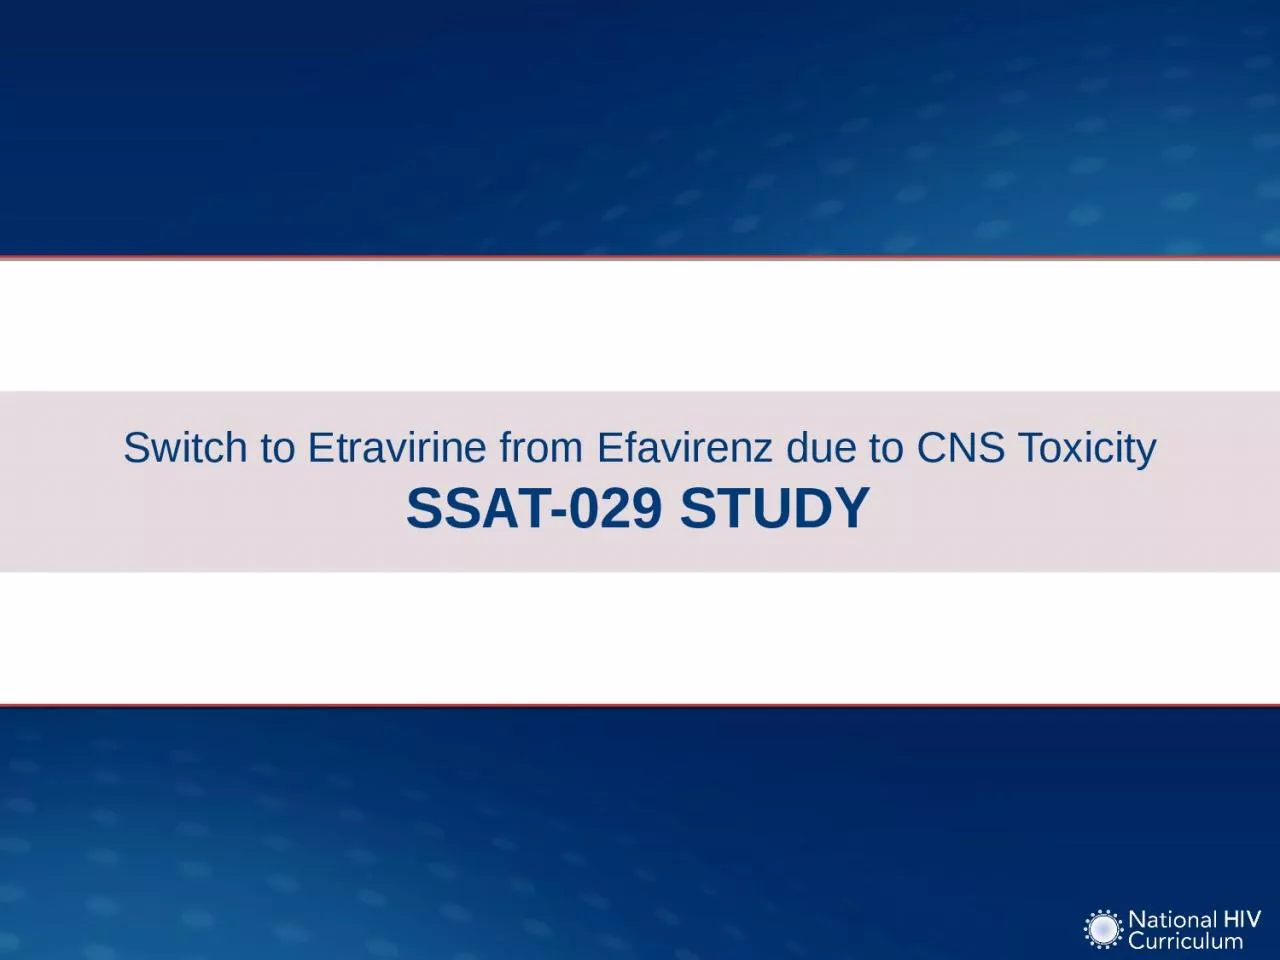 Switch to Etravirine from Efavirenz due to CNS Toxicity